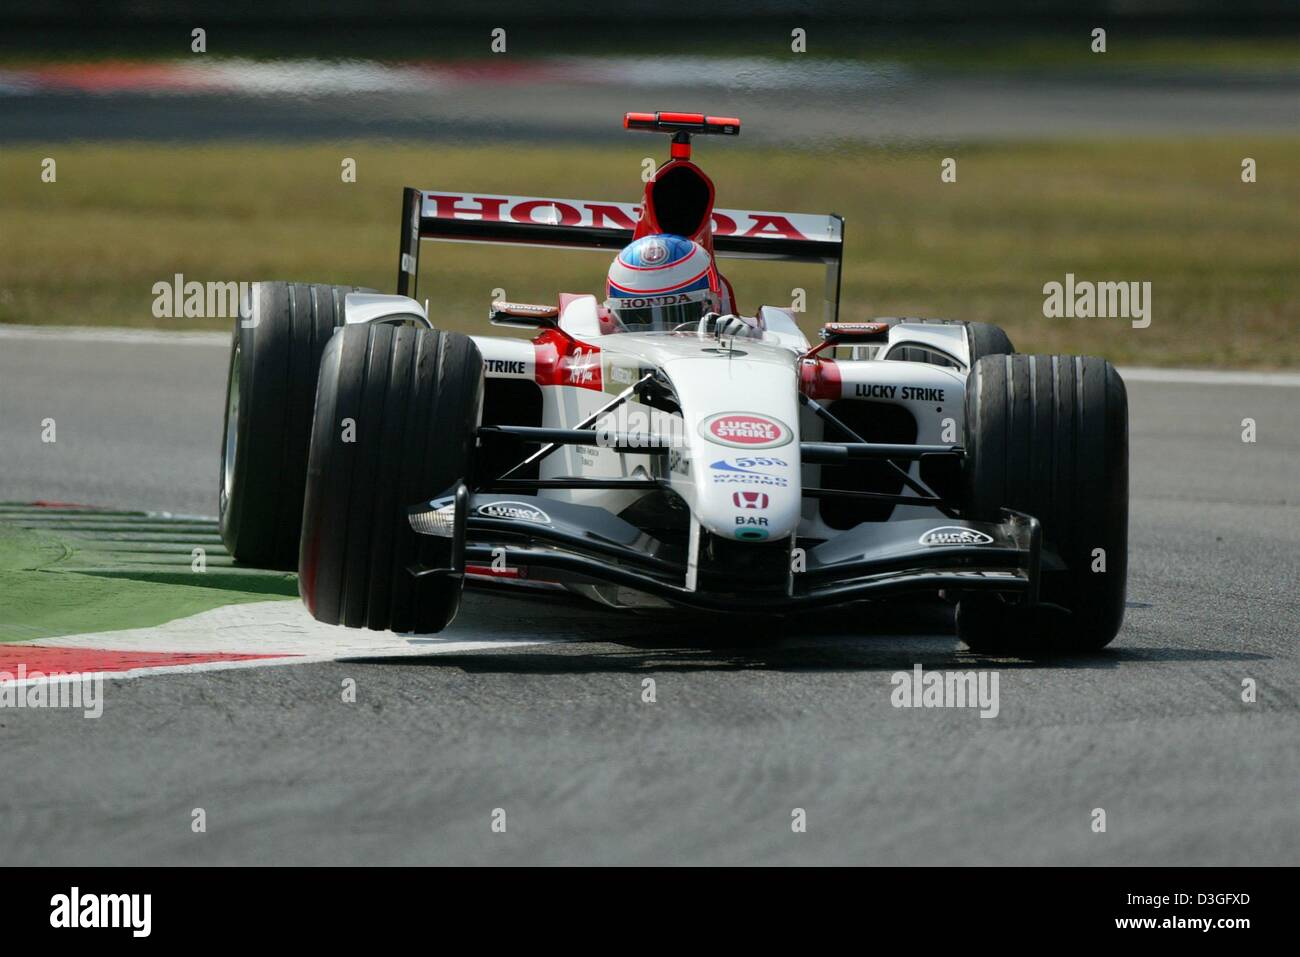 (dpa) - British formula one pilot Jenson Button (Bar-Honda) races through the a curve during the training session for the Italian Grand Prix in Monza, Italy, 10 September 2004. The Grand Prix will be held on Sunday, 12 September 2004. Stock Photo